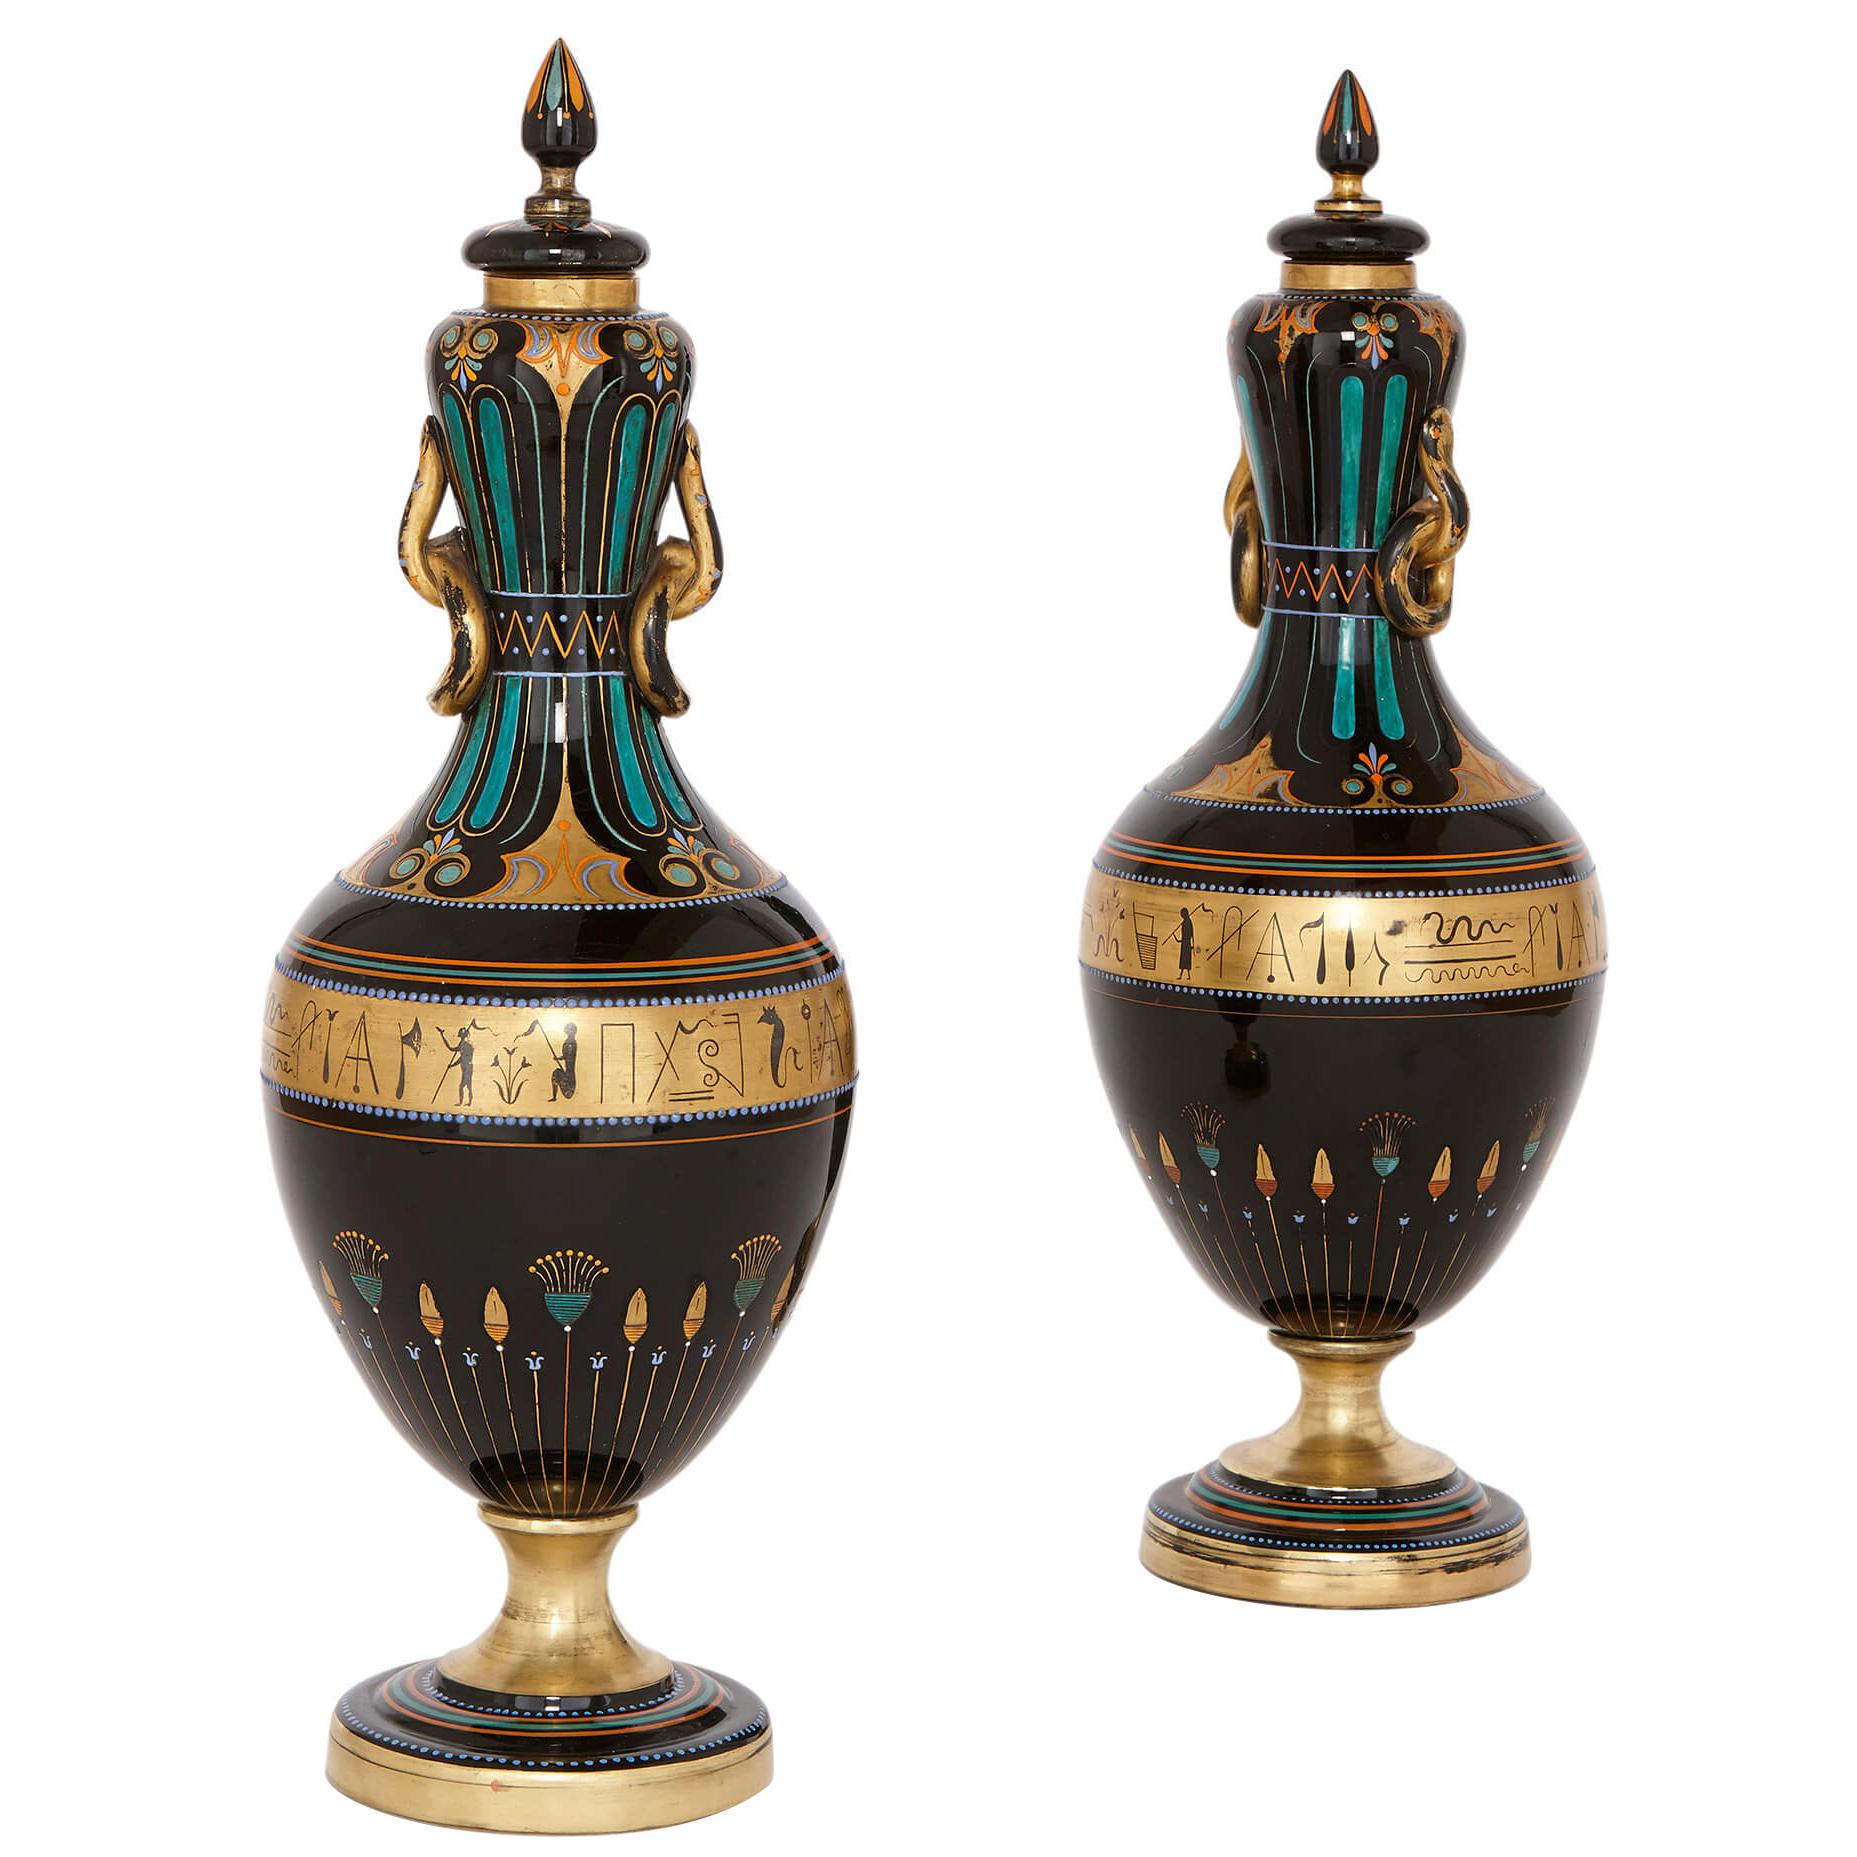 Pair of Antique Bohemian Black Glass Vases in the Egyptian Revival Style